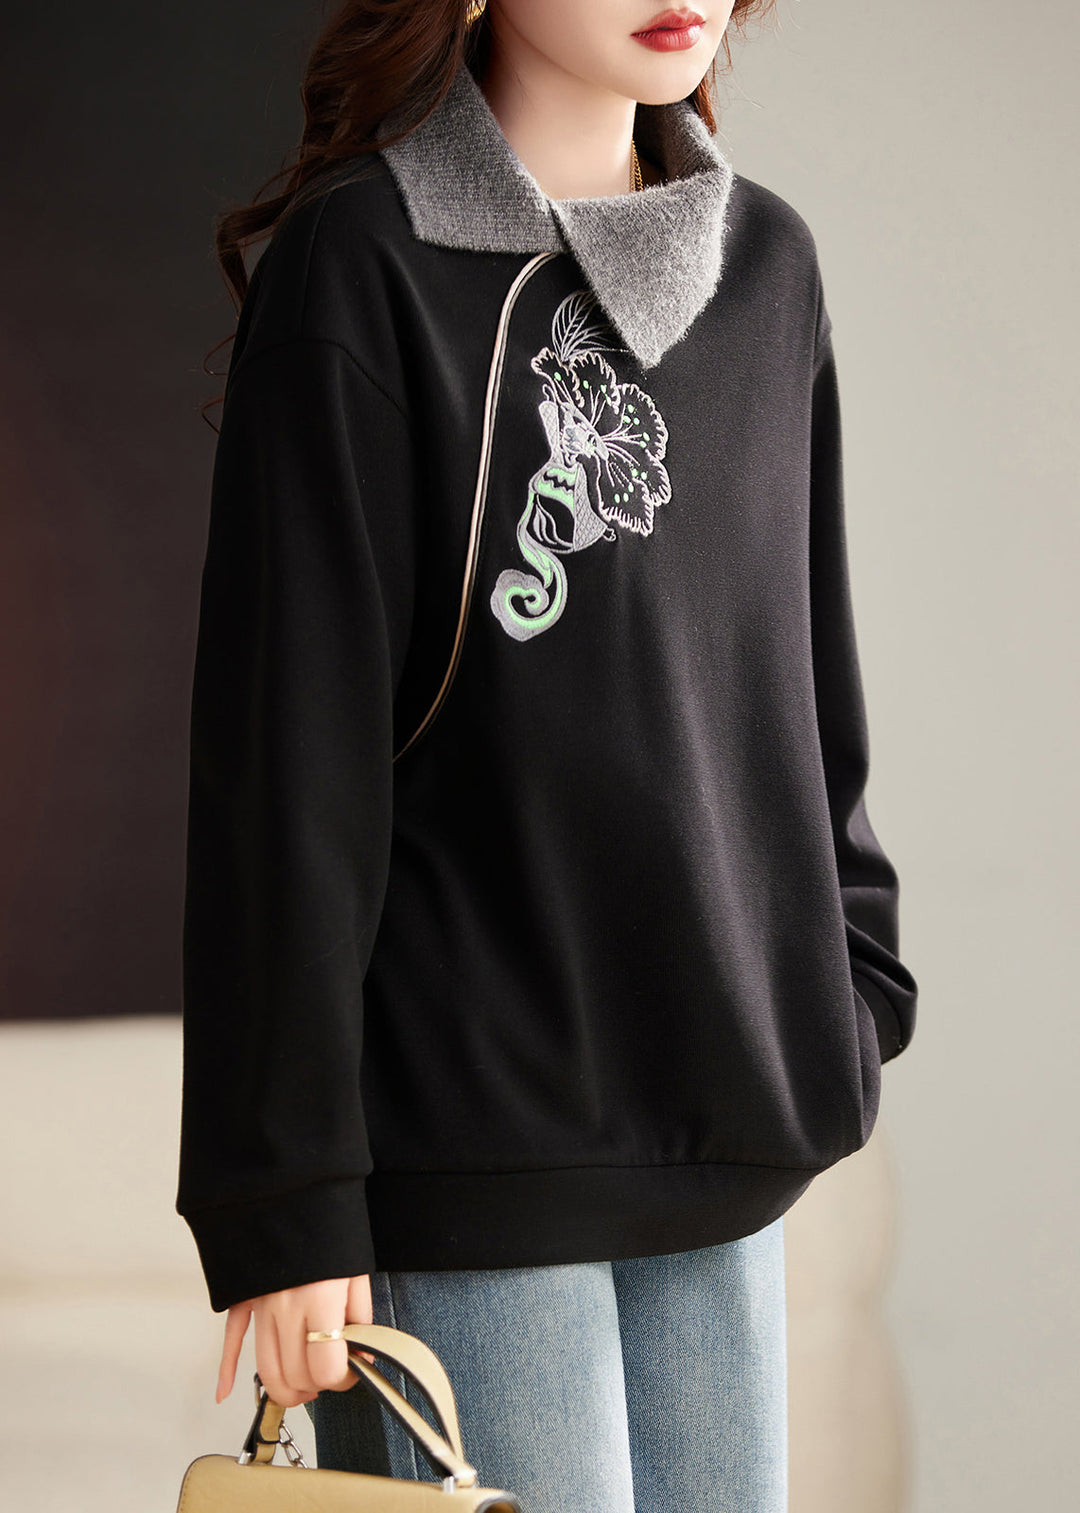 Style Black Embroideried Warm Fleece Tops Spring